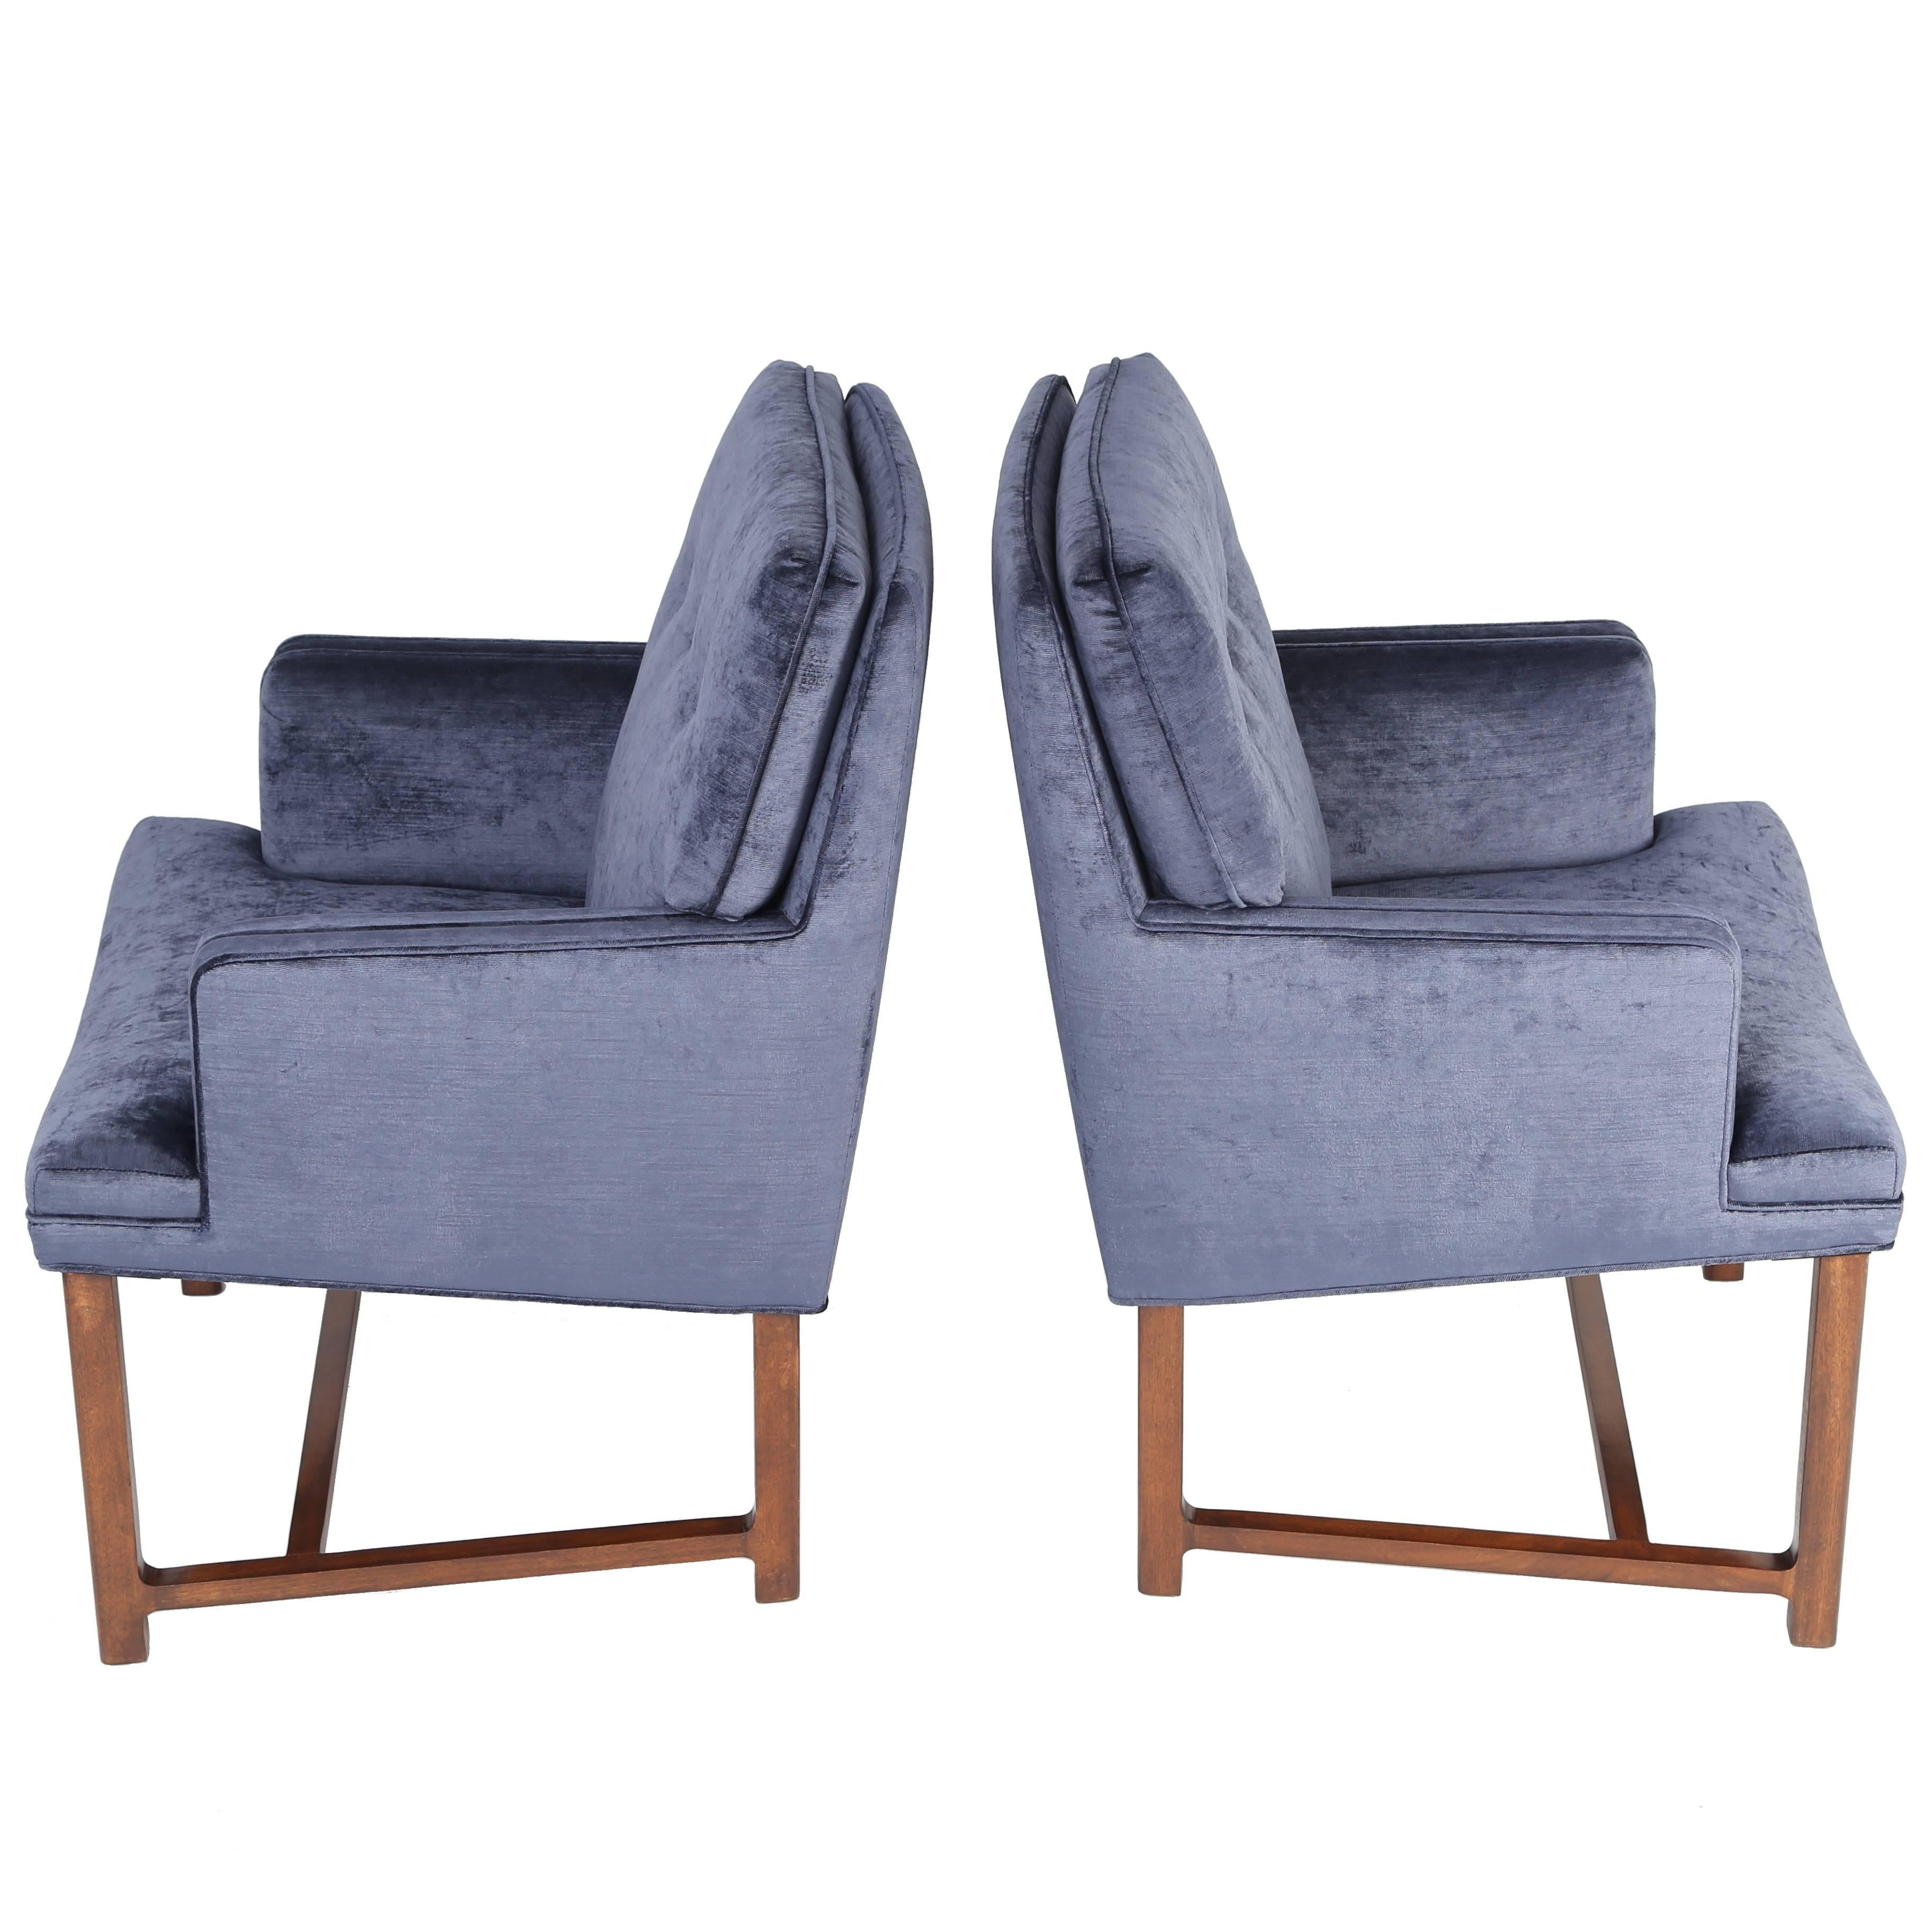 This fine pair of armchairs designed by Edward Wormley reflects Dunbar's signature high-quality construction. Sturdy and versatile, these chairs have been professionally refinished and newly reupholstered in a rich blue antiqued cotton velvet. These